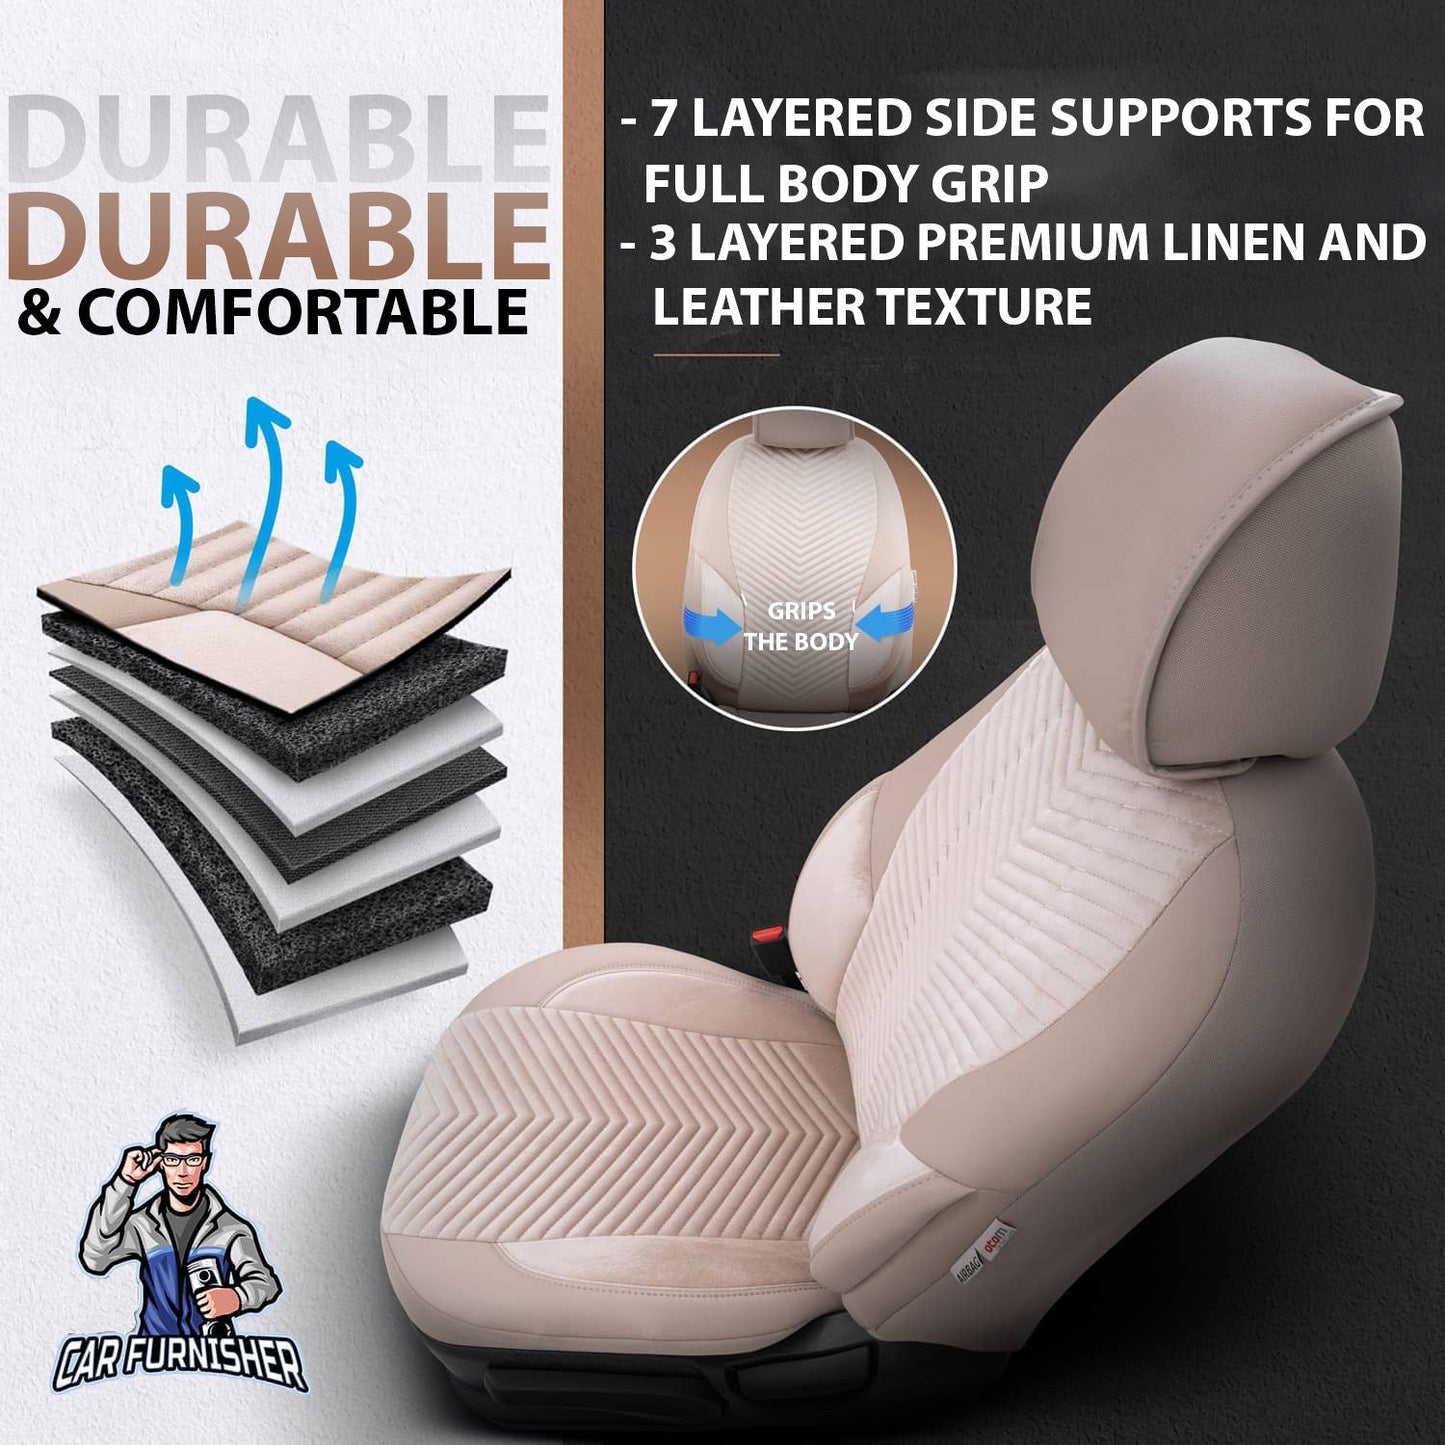 Volkswagen Jetta Seat Covers Advanced Babyface Design Beige 5 Seats + Headrests (Full Set) Leather & Suede Fabric